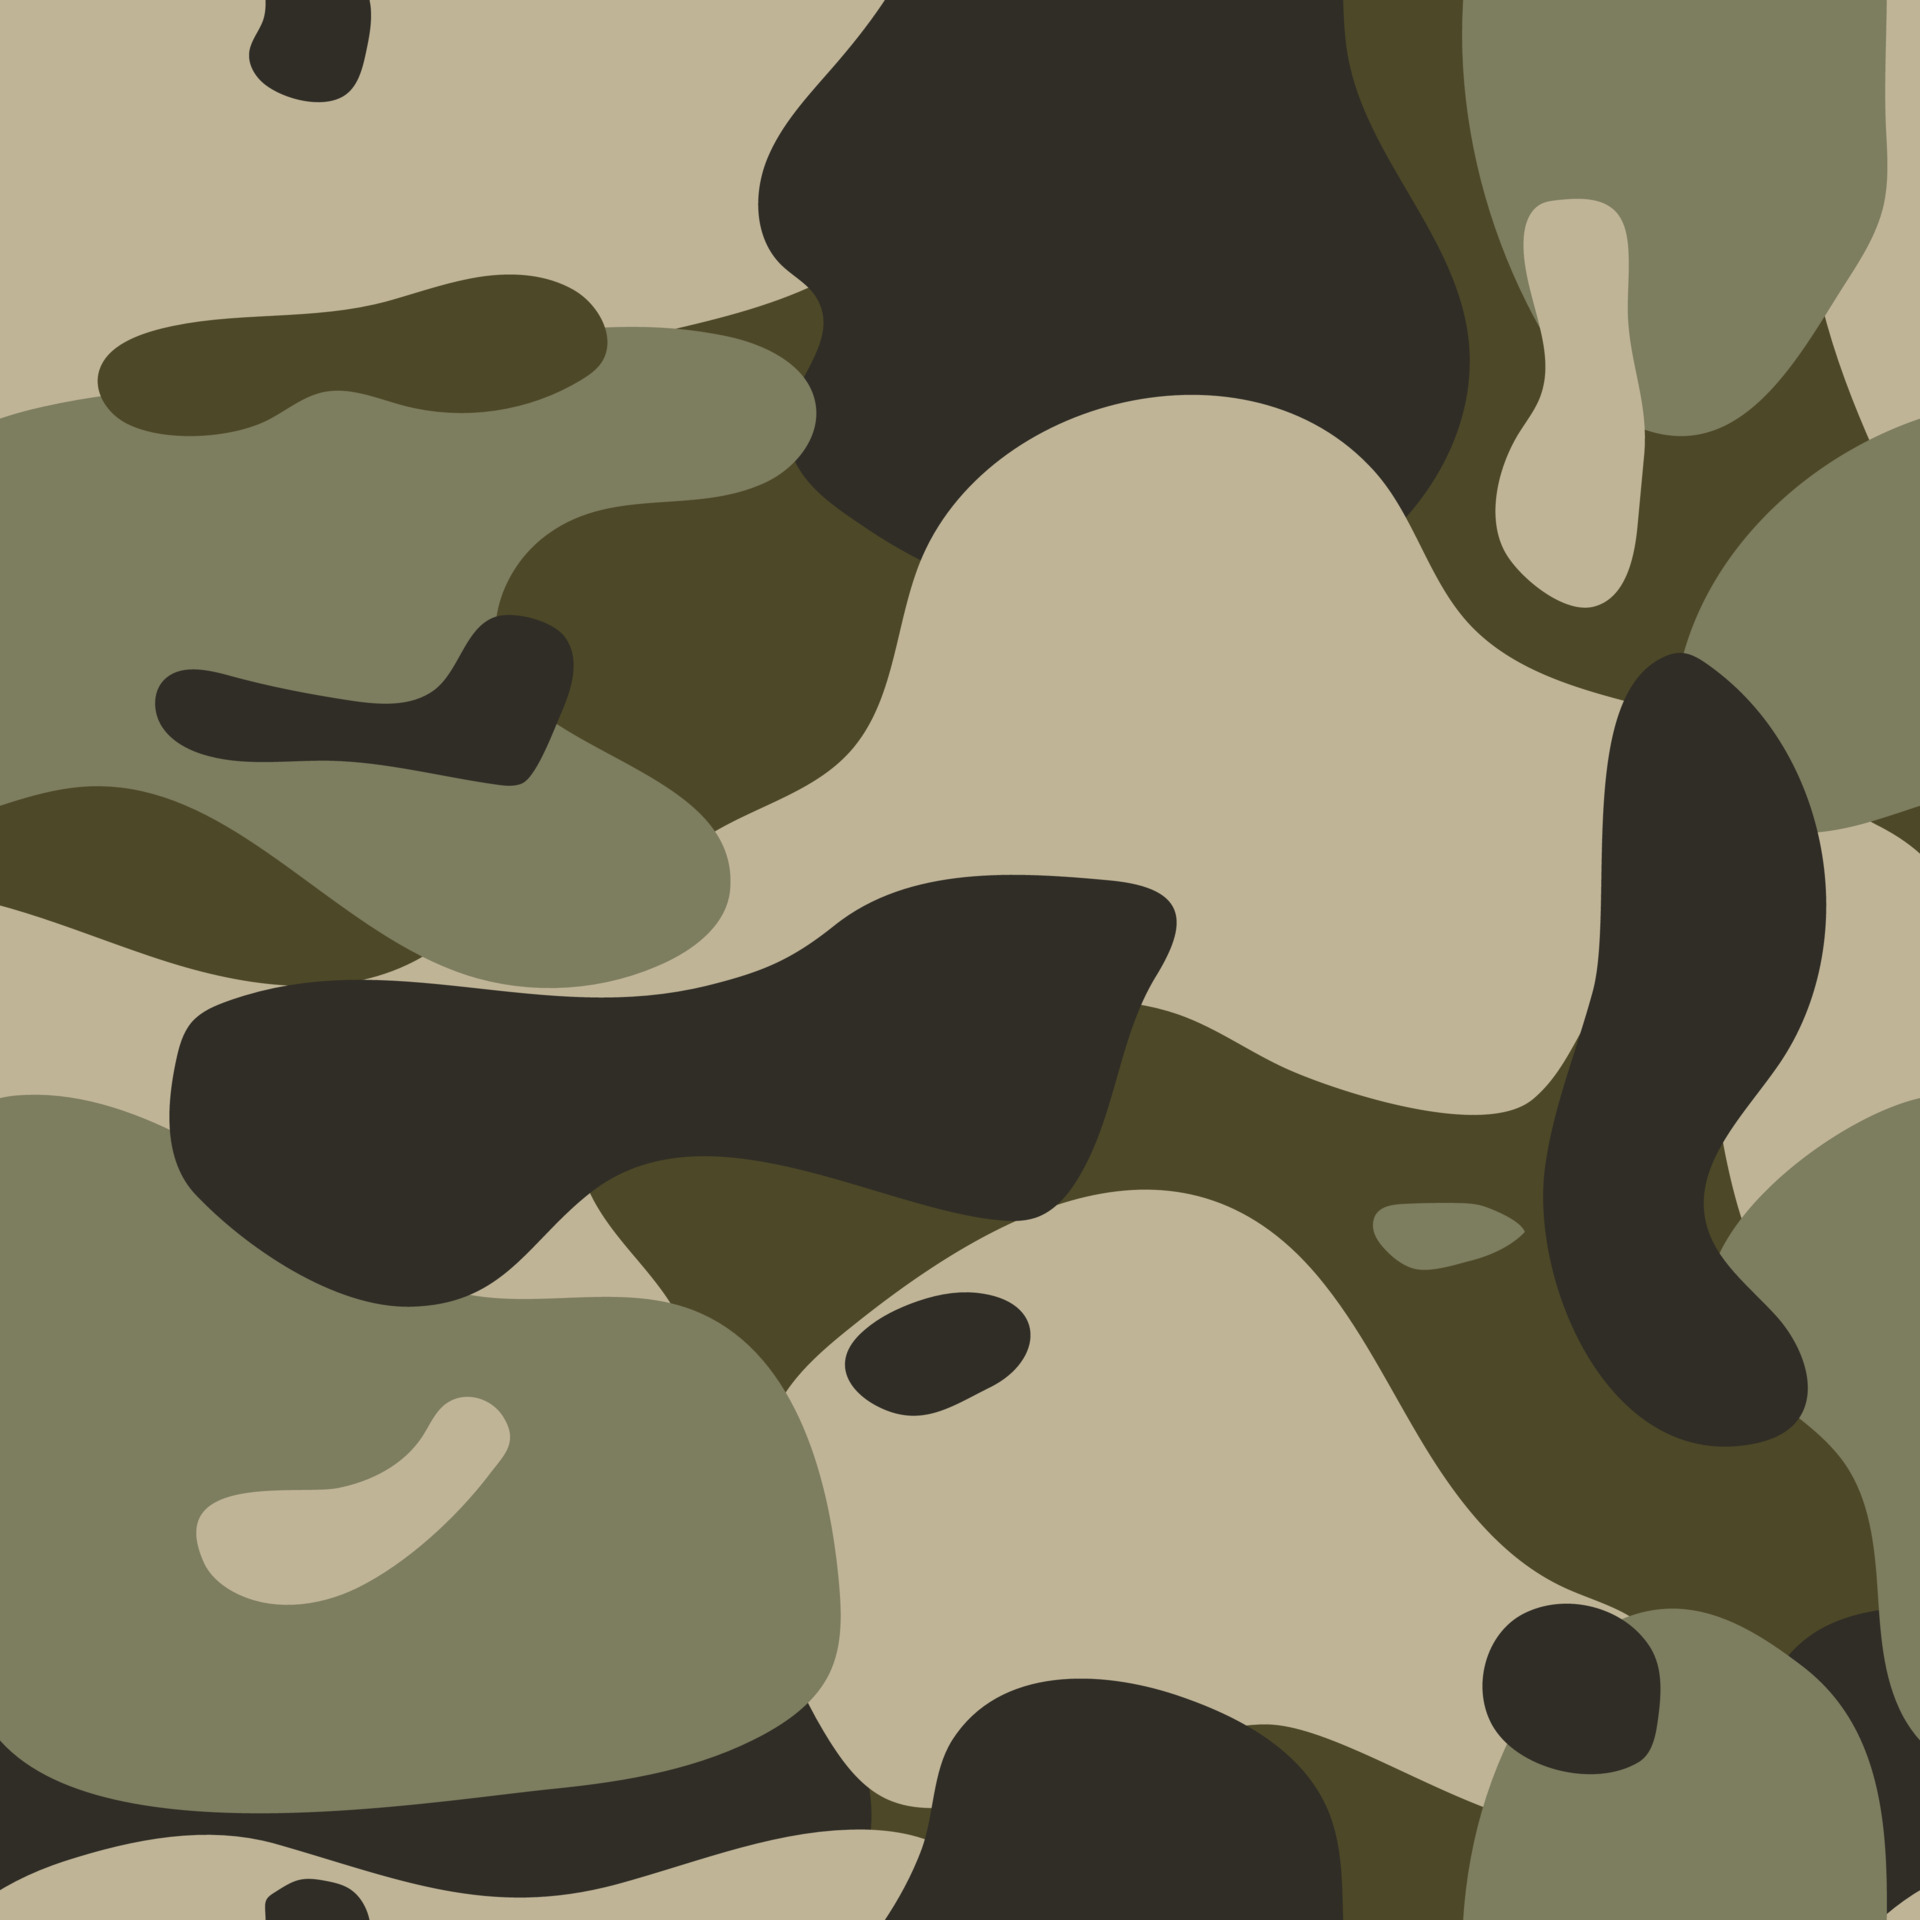 https://static.vecteezy.com/system/resources/previews/013/800/553/original/camouflage-seamless-pattern-green-black-and-khaki-color-background-army-theme-free-vector.jpg